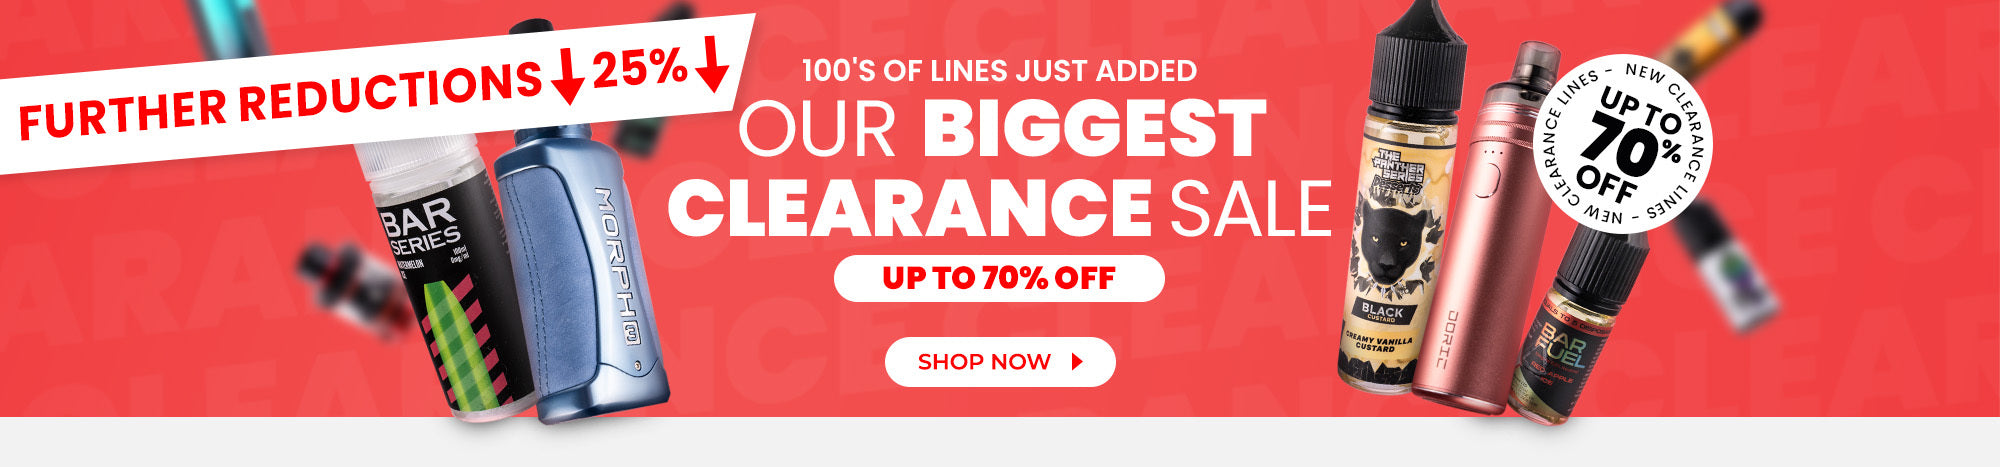 Further Reductions on Our Clearance Sale - Get a Further 25% Off Our Already Discounted Lines